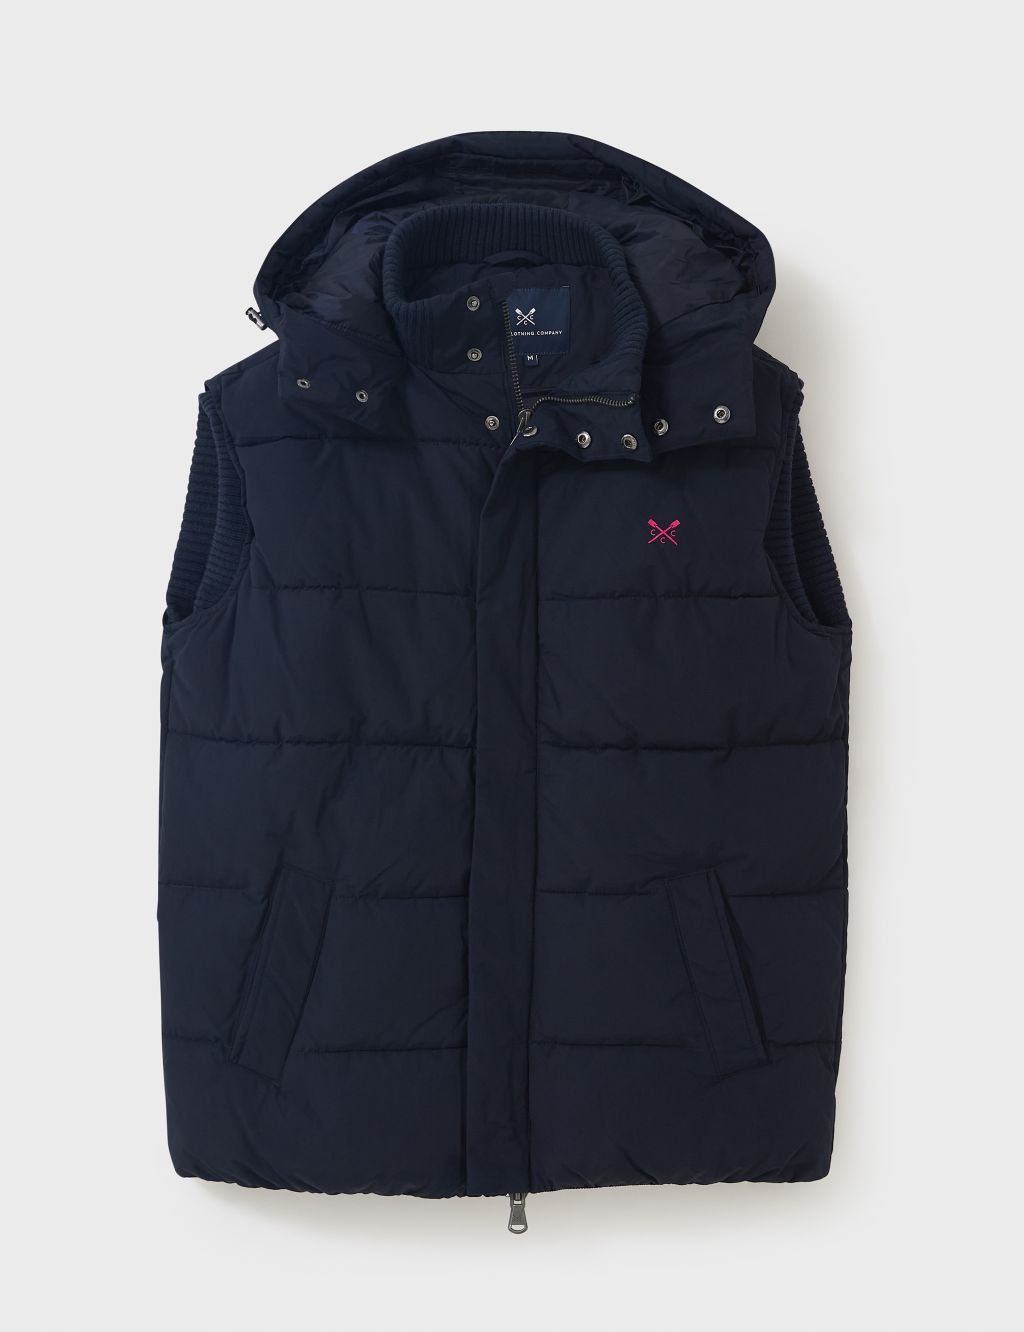 Cotton Rich Hooded Gilet image 2